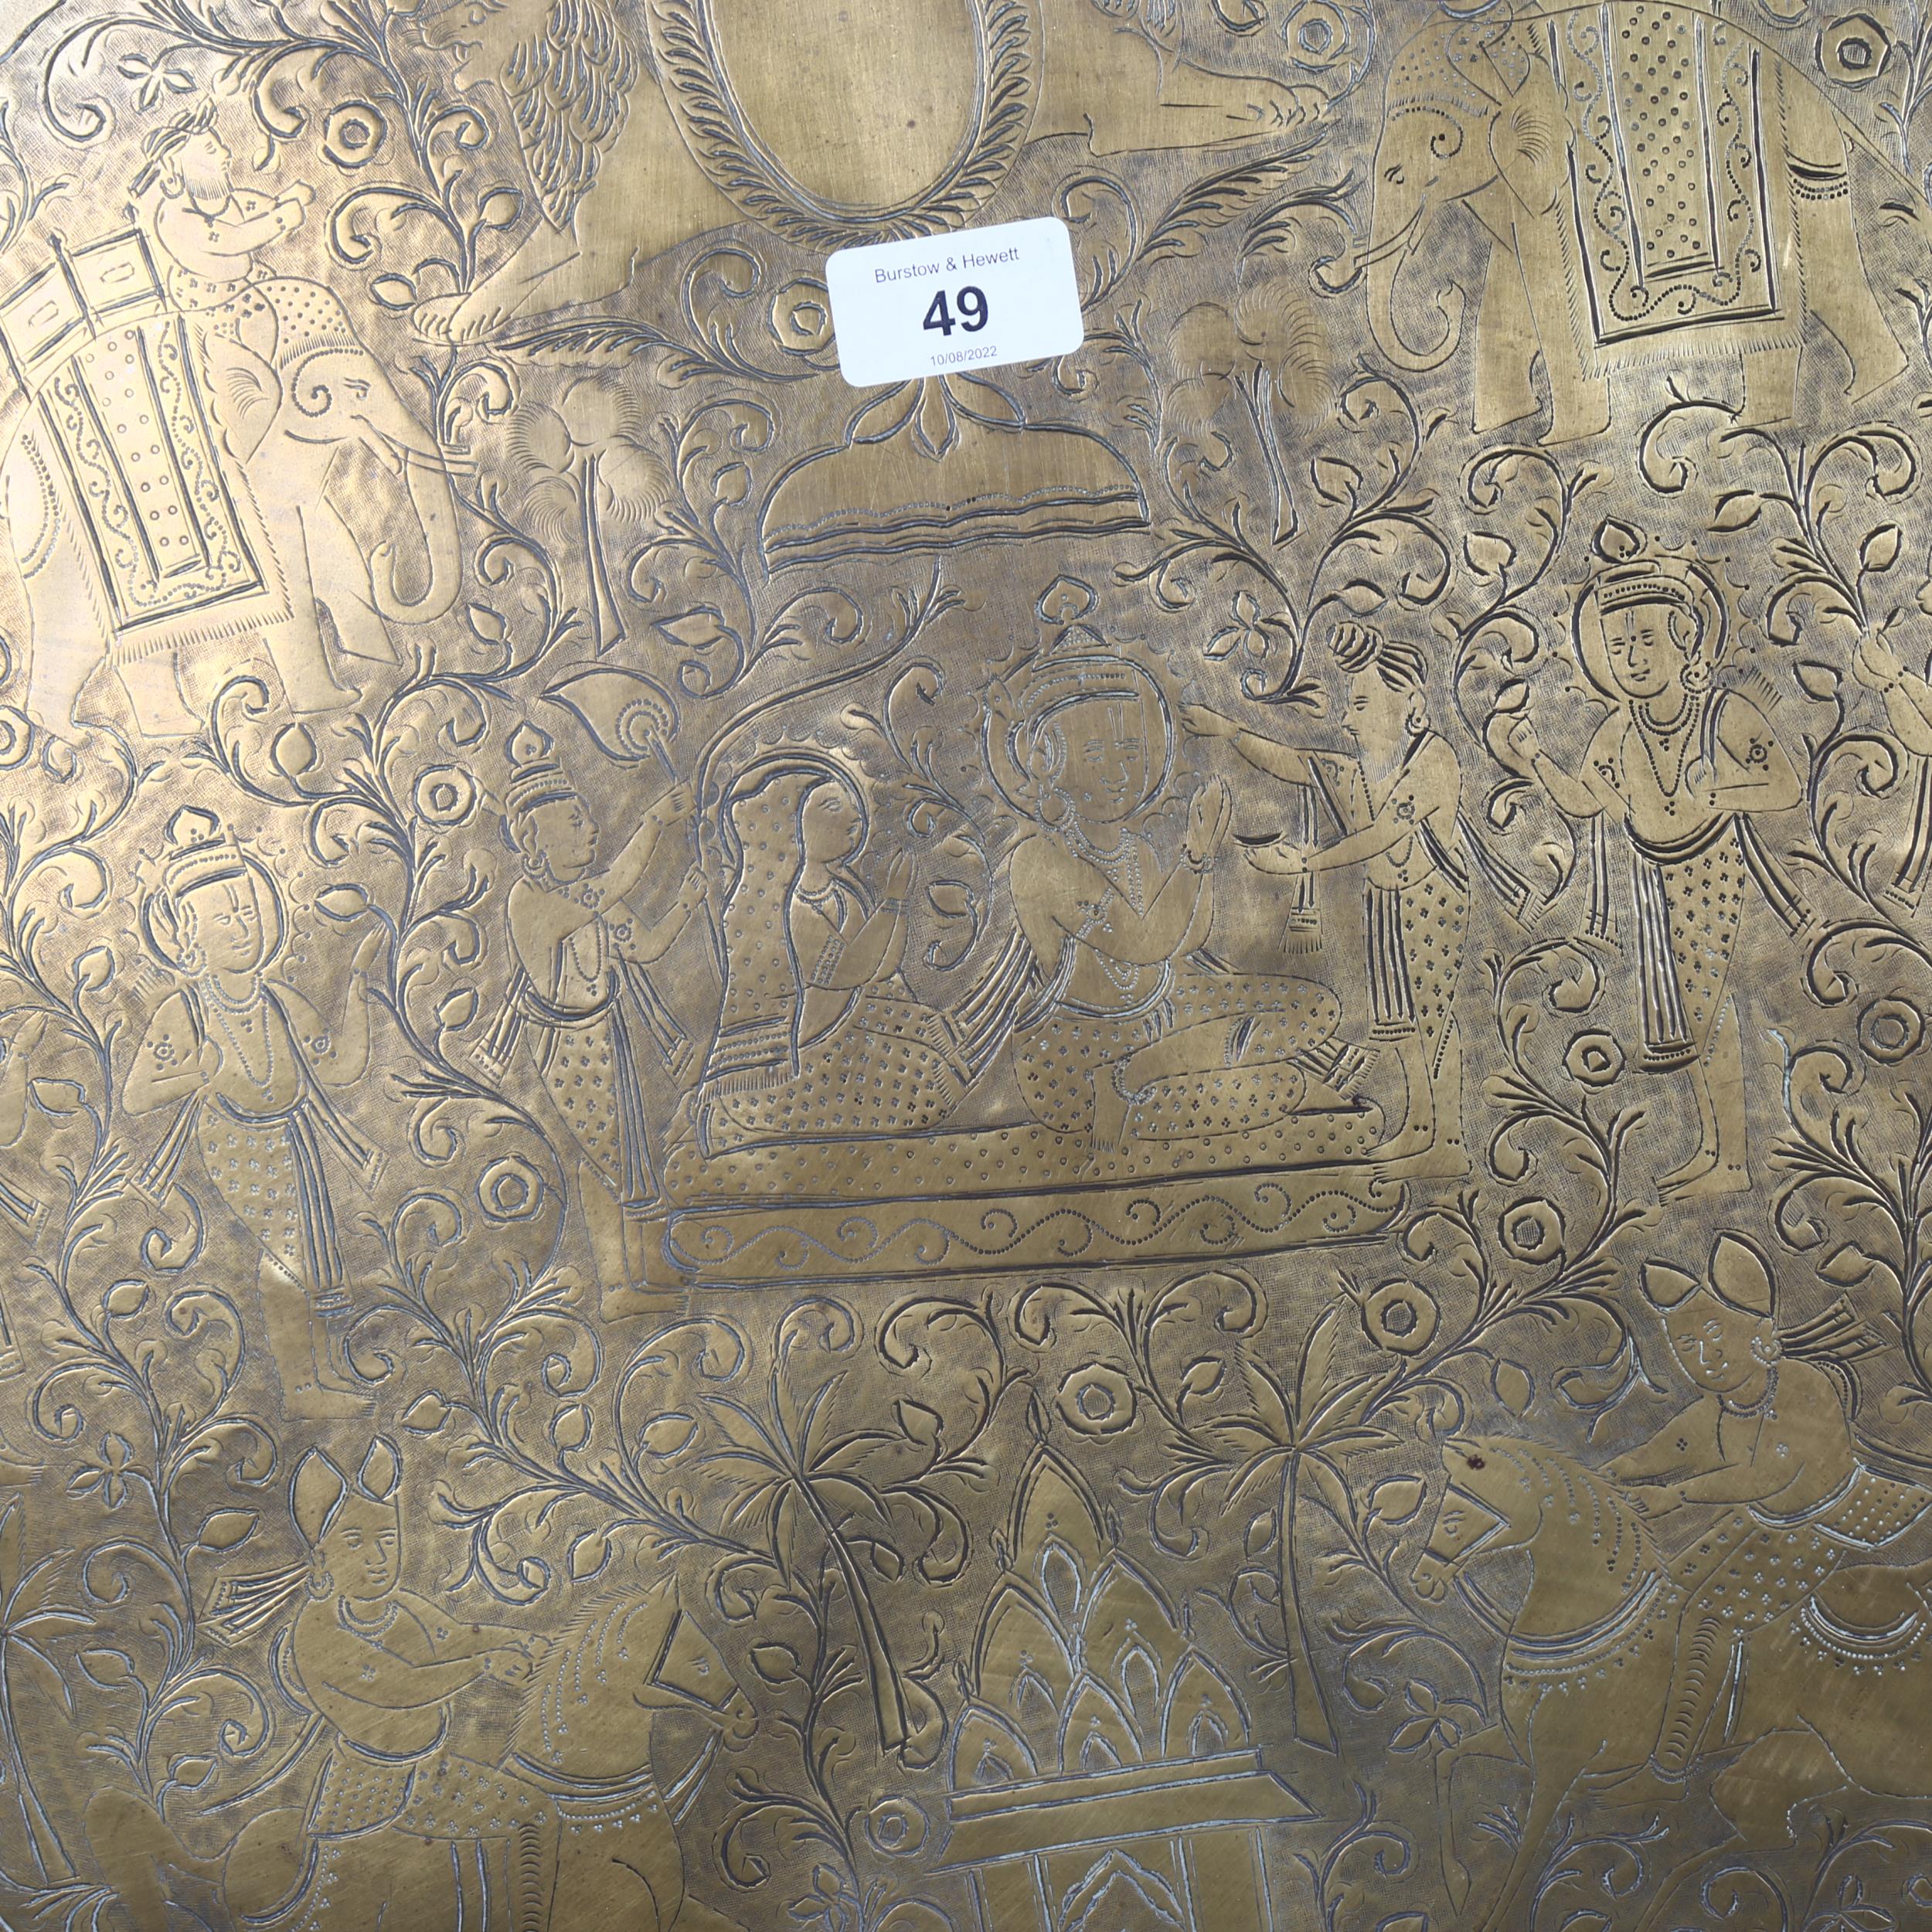 A large Indian engraved brass tray, with lobed border and figural decoration, diameter 73cm - Image 2 of 2